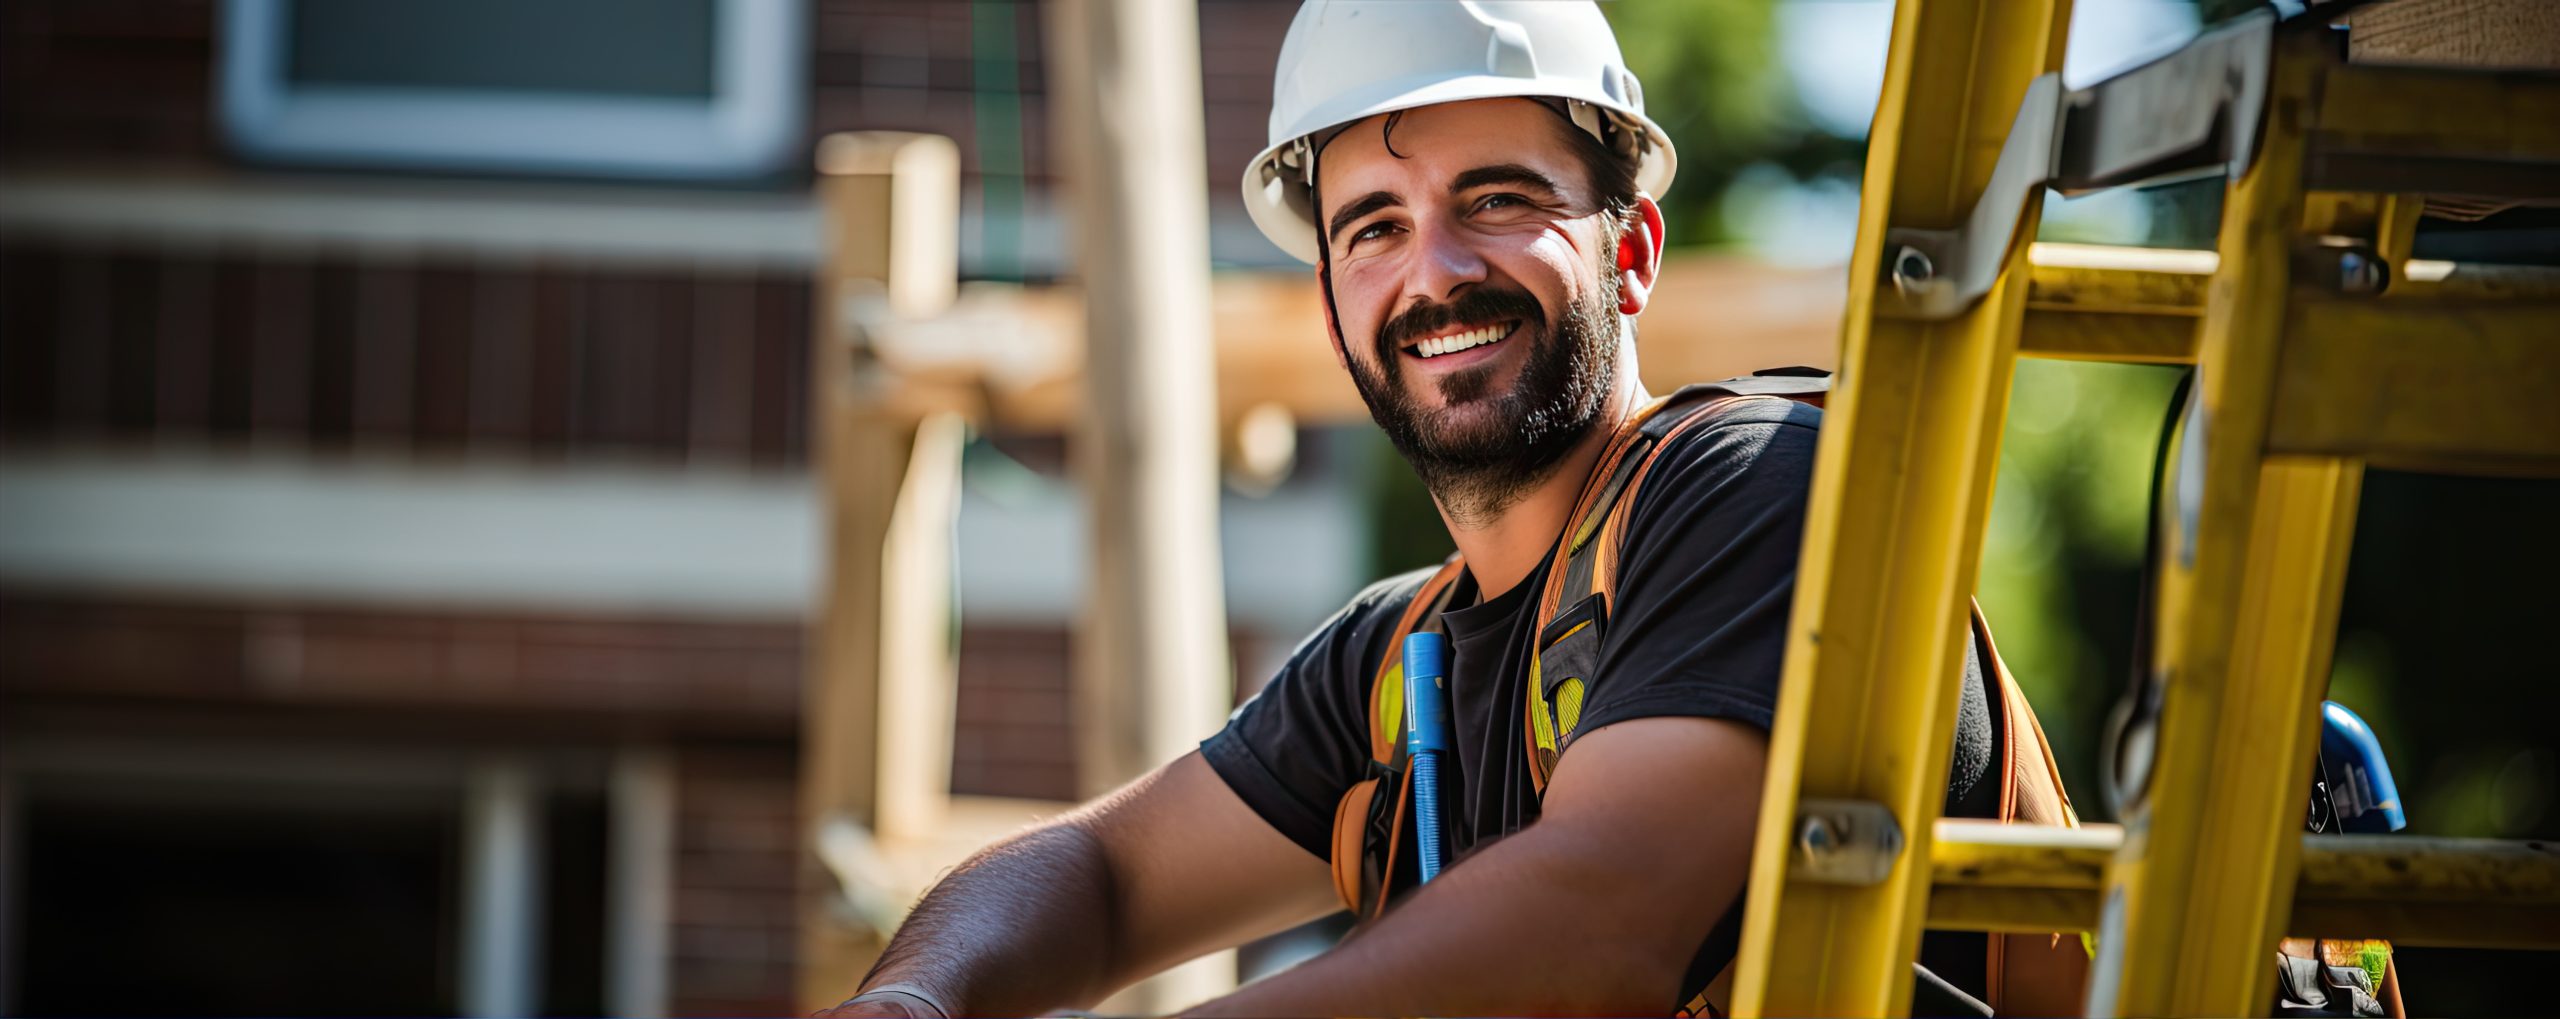 Roofer in yellow hard hat smiling among job site